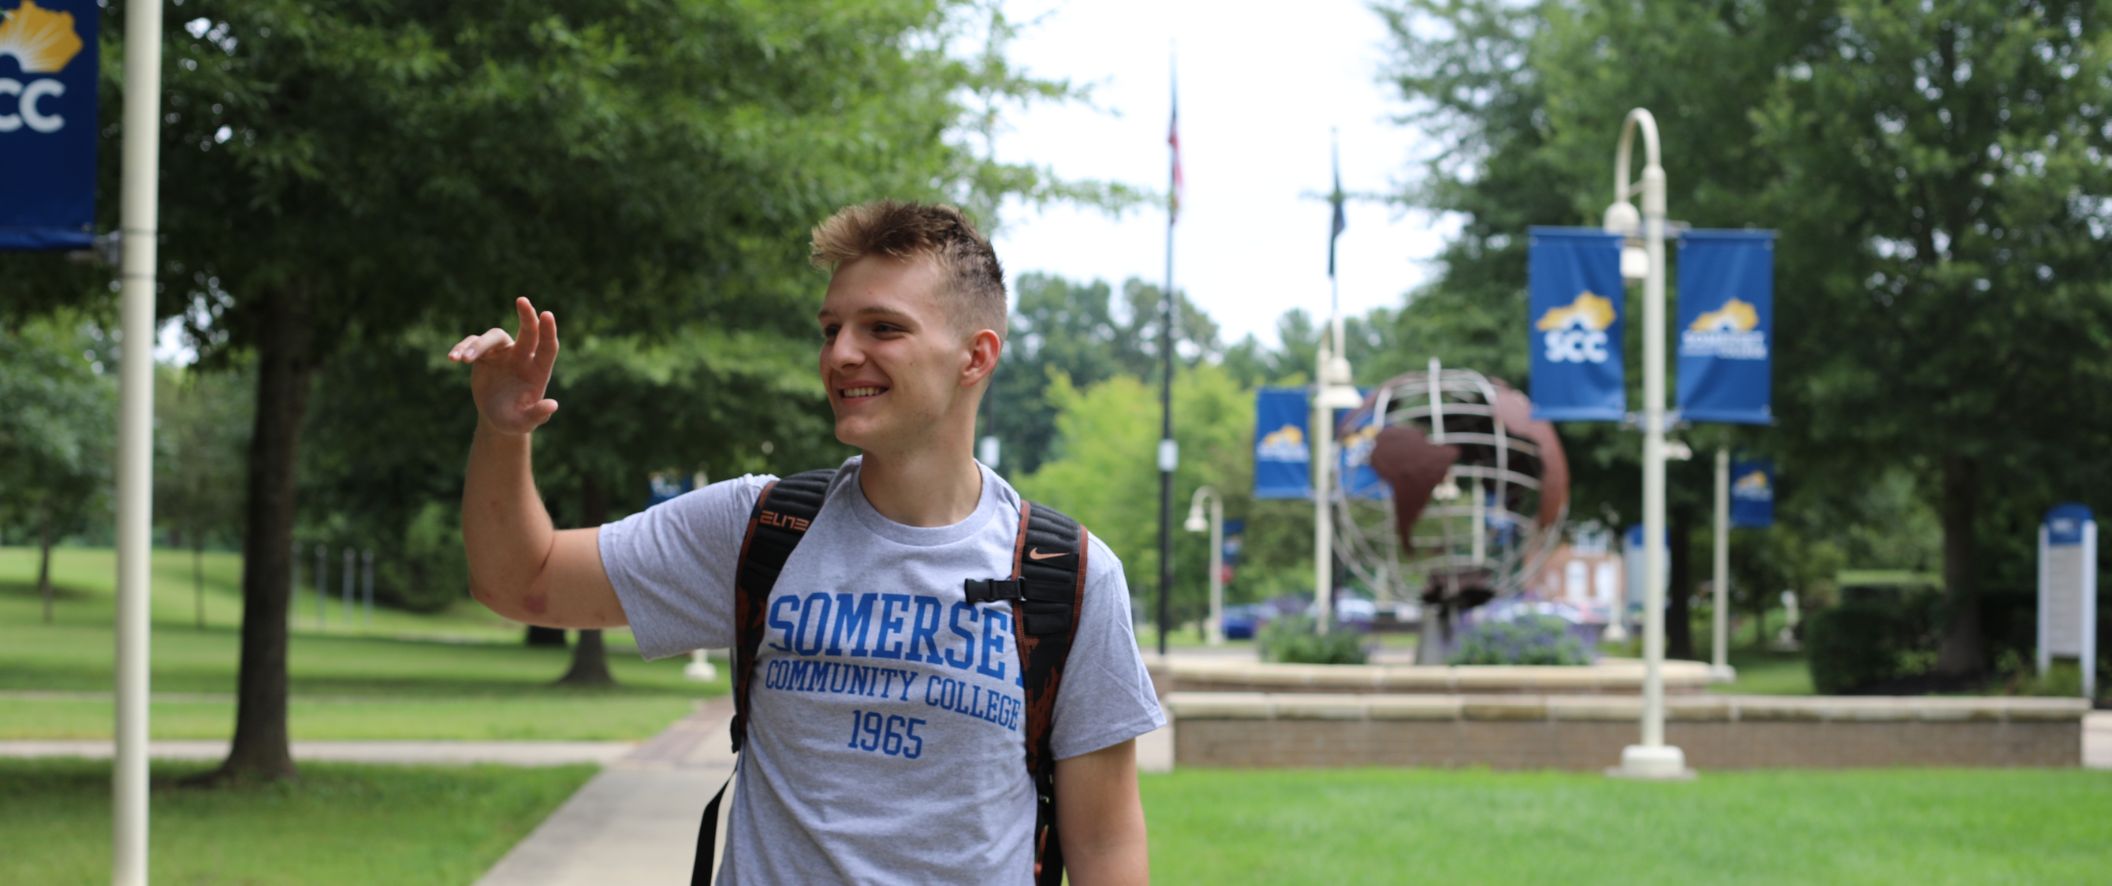 Male student walking on campus and waving